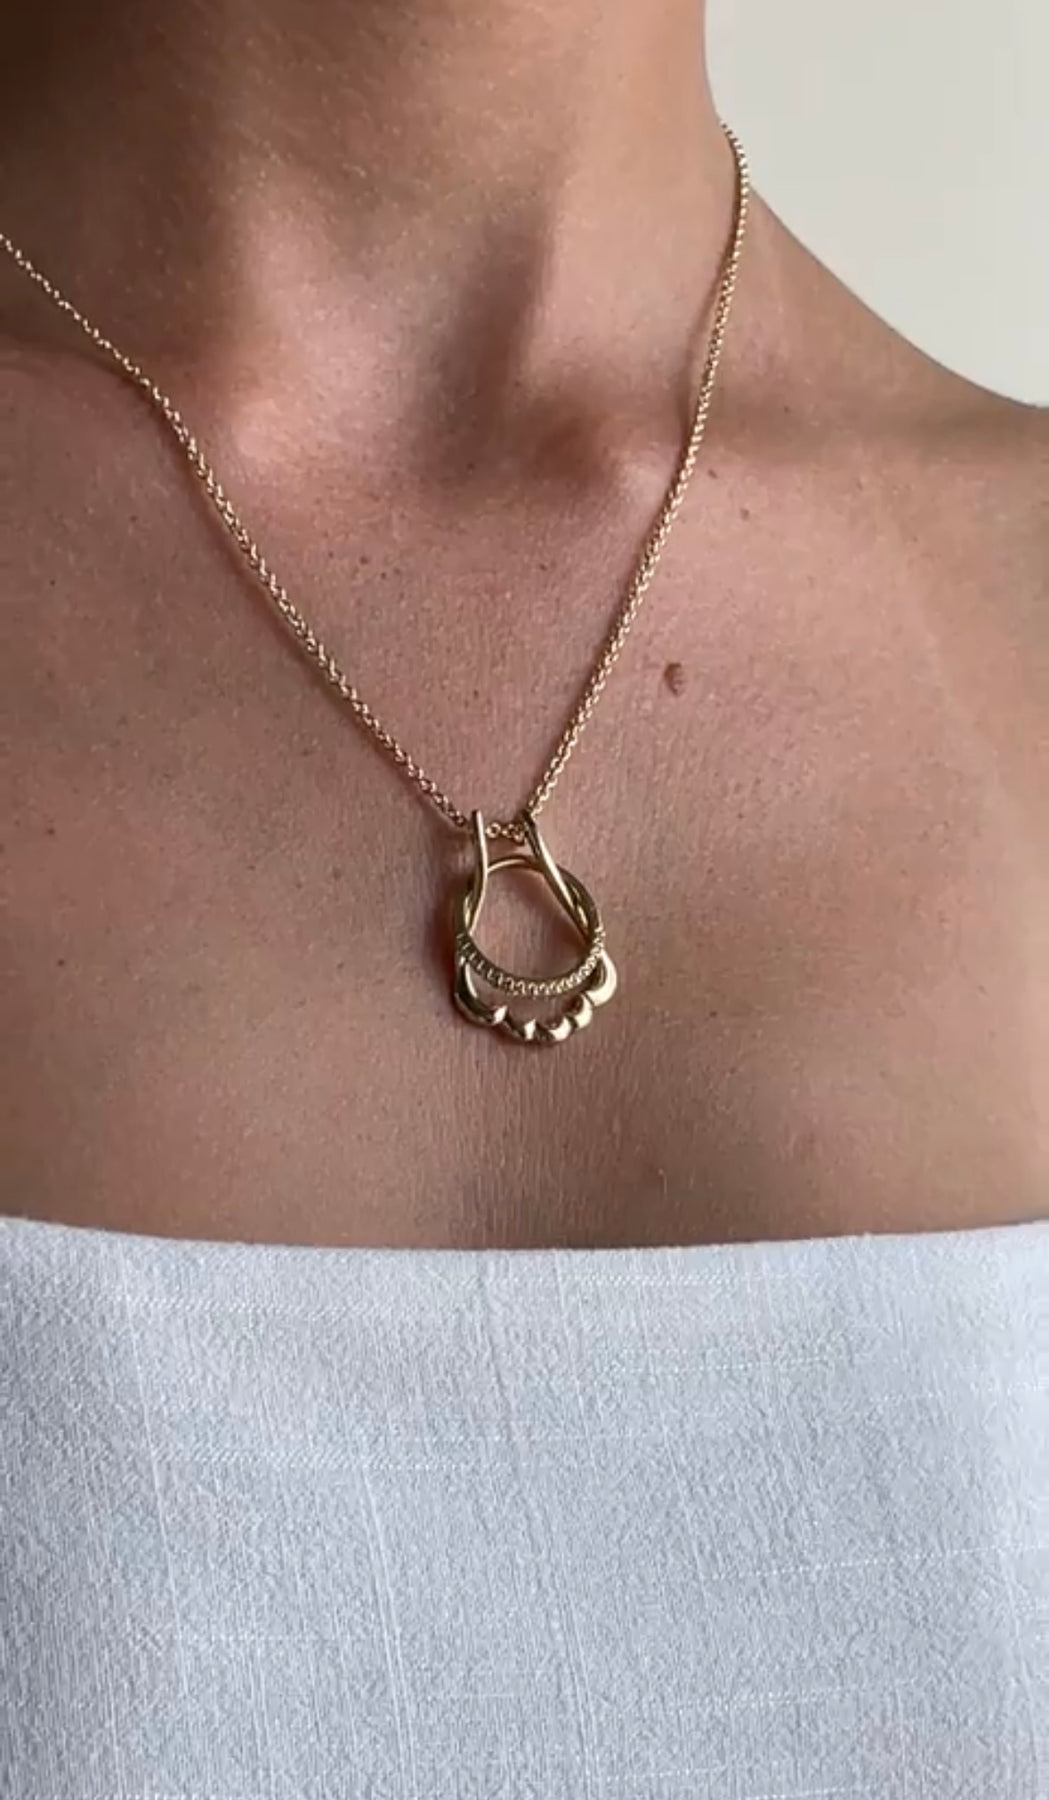 The Ring Holder Necklace - Curlicue NZ Eco Jewellery